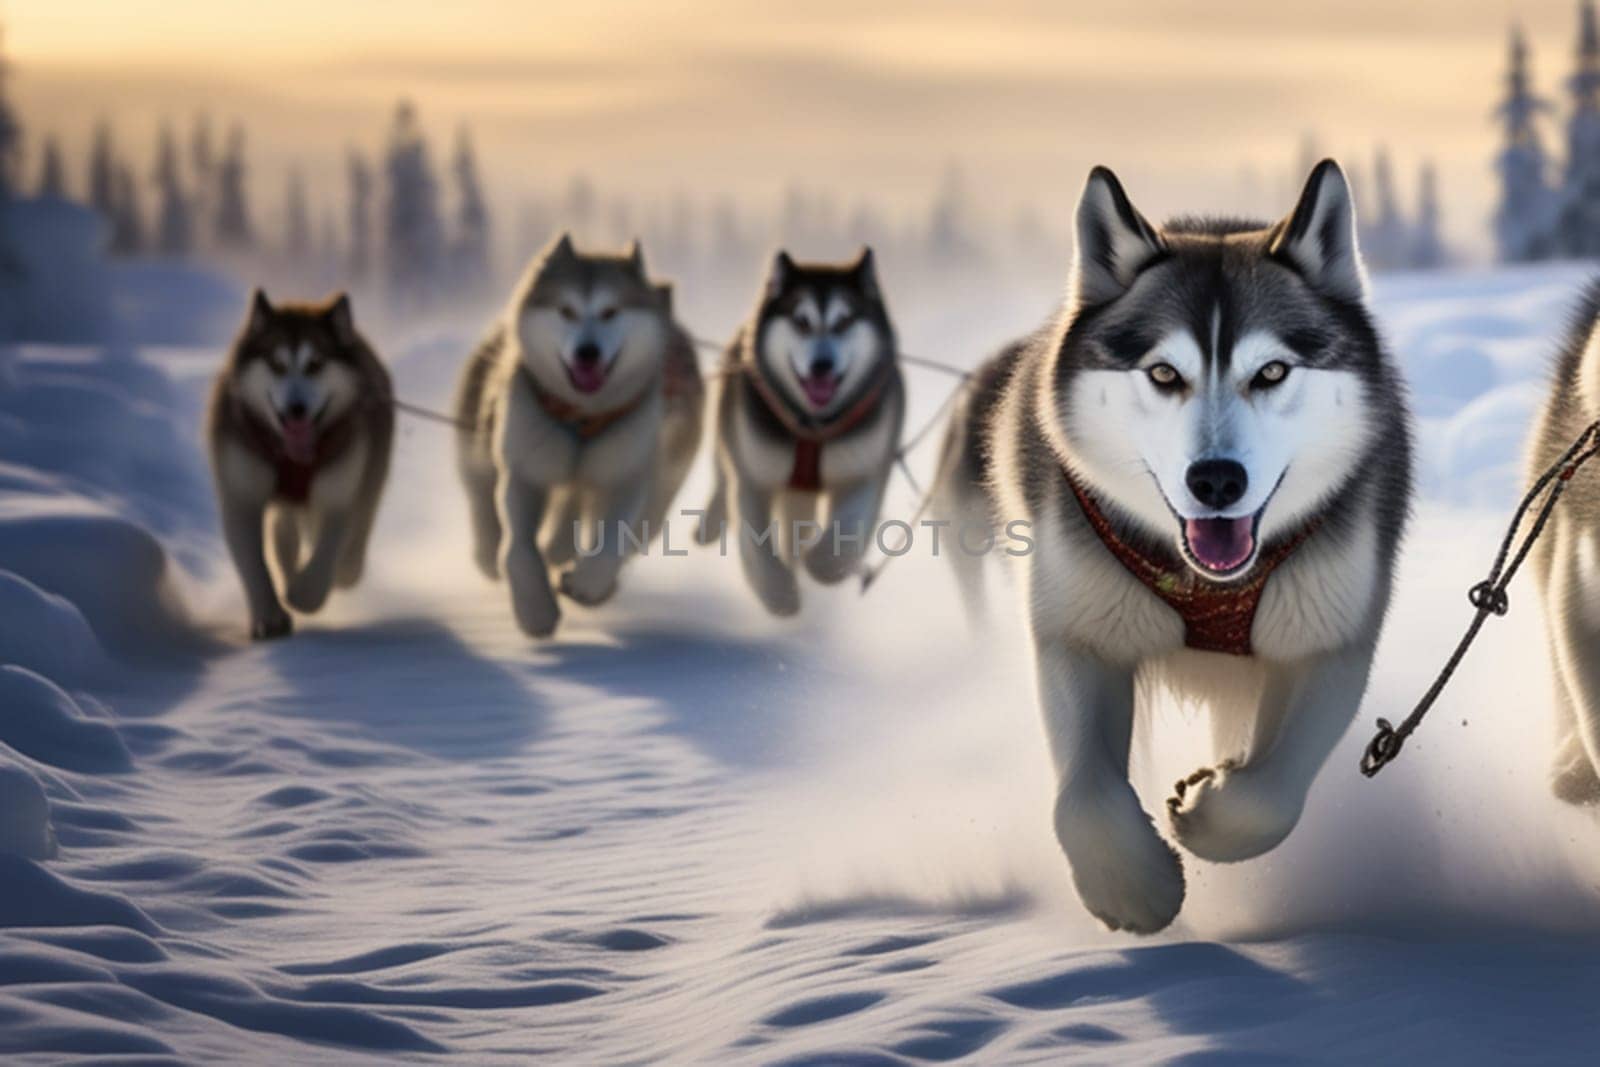 A team of husky sled dogs runs along a snowy wild road. Sleigh ride with a husky through the winter countryside. Husky dogs in a team in a winter landscape